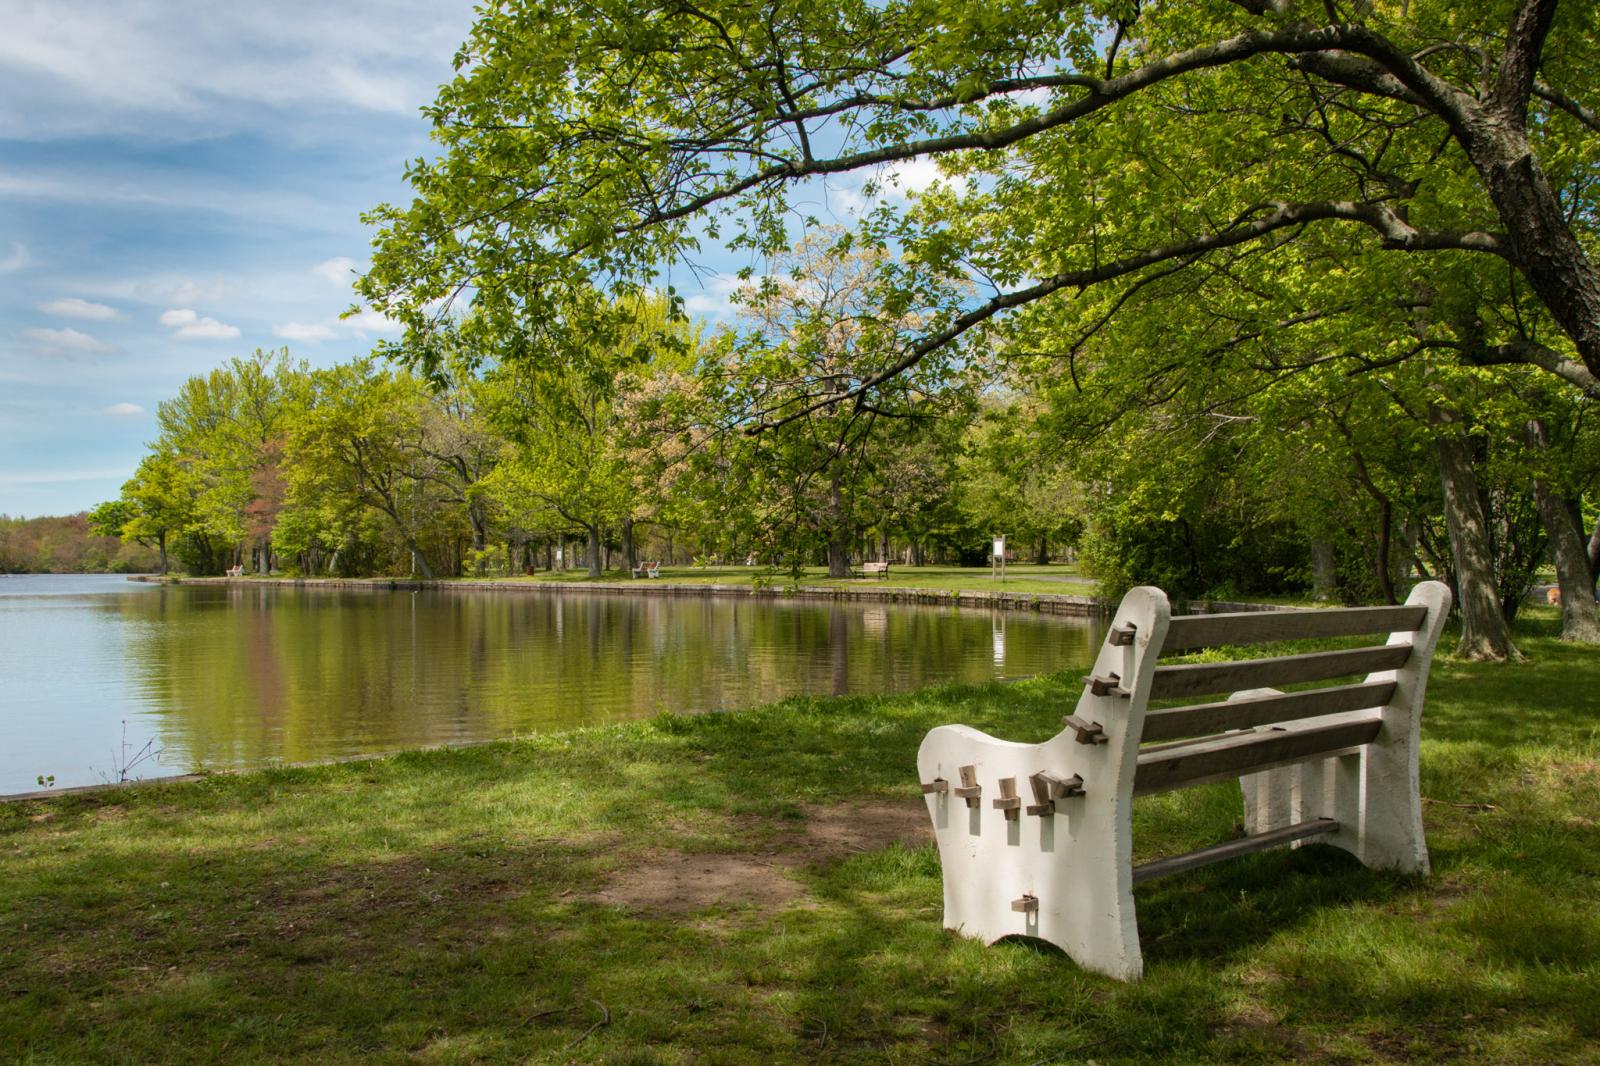 Belmont Lake State Park Hours